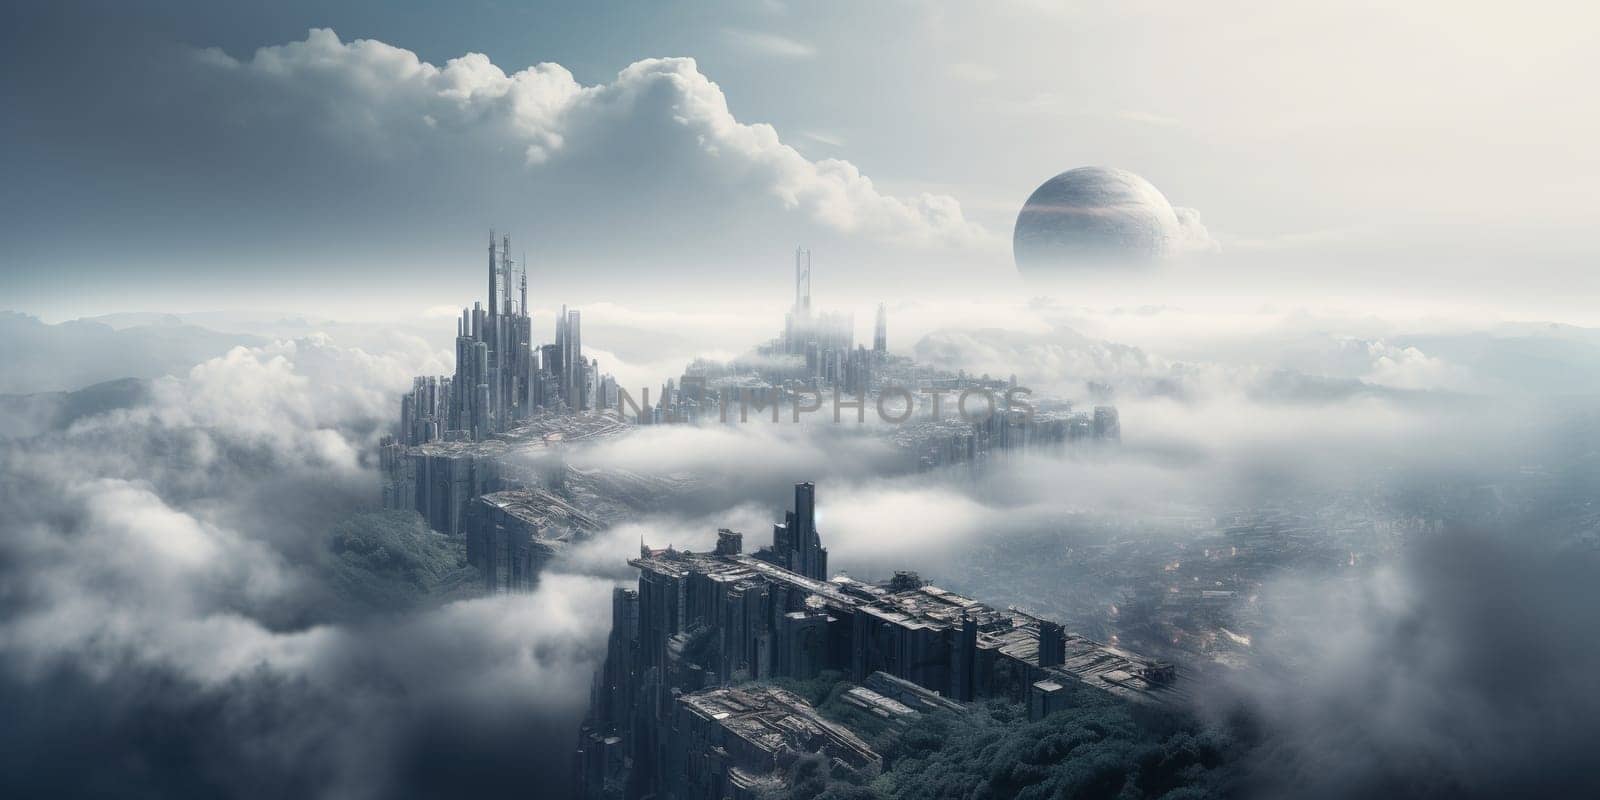 "Futuristic megacity with towering skyscrapers on a dramatic mountain landscape in the clouds."